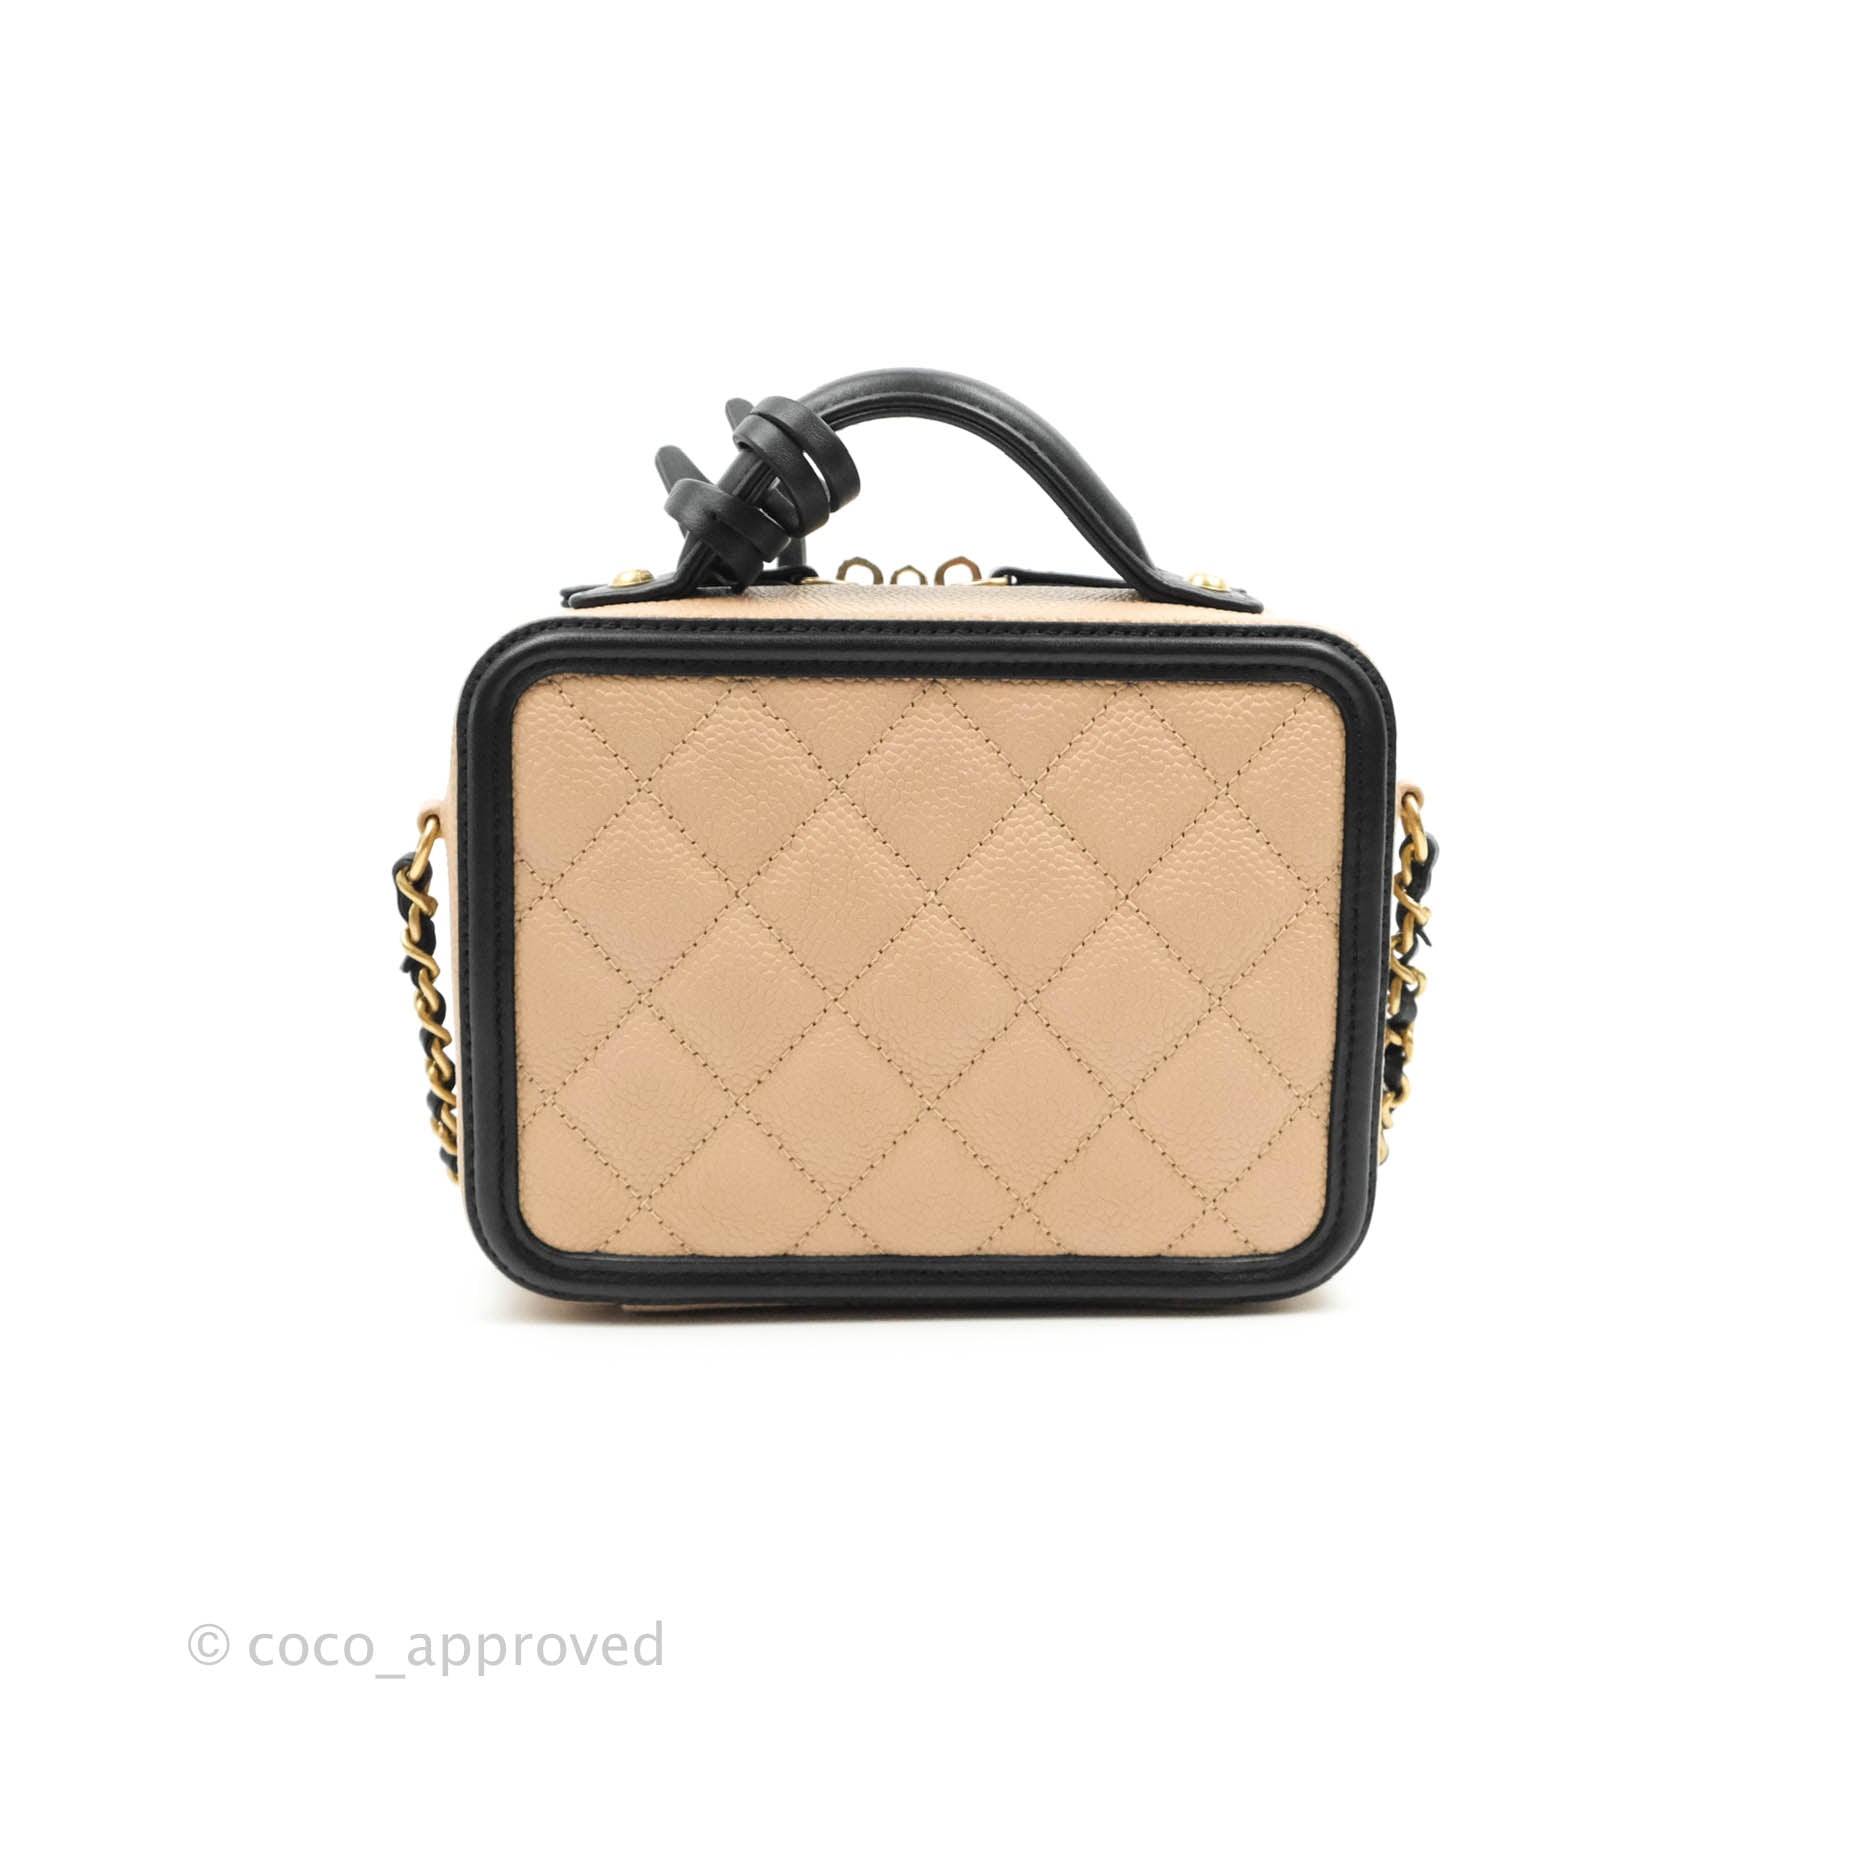 Sold at Auction: Chanel, CC Filigree Vanity Case in